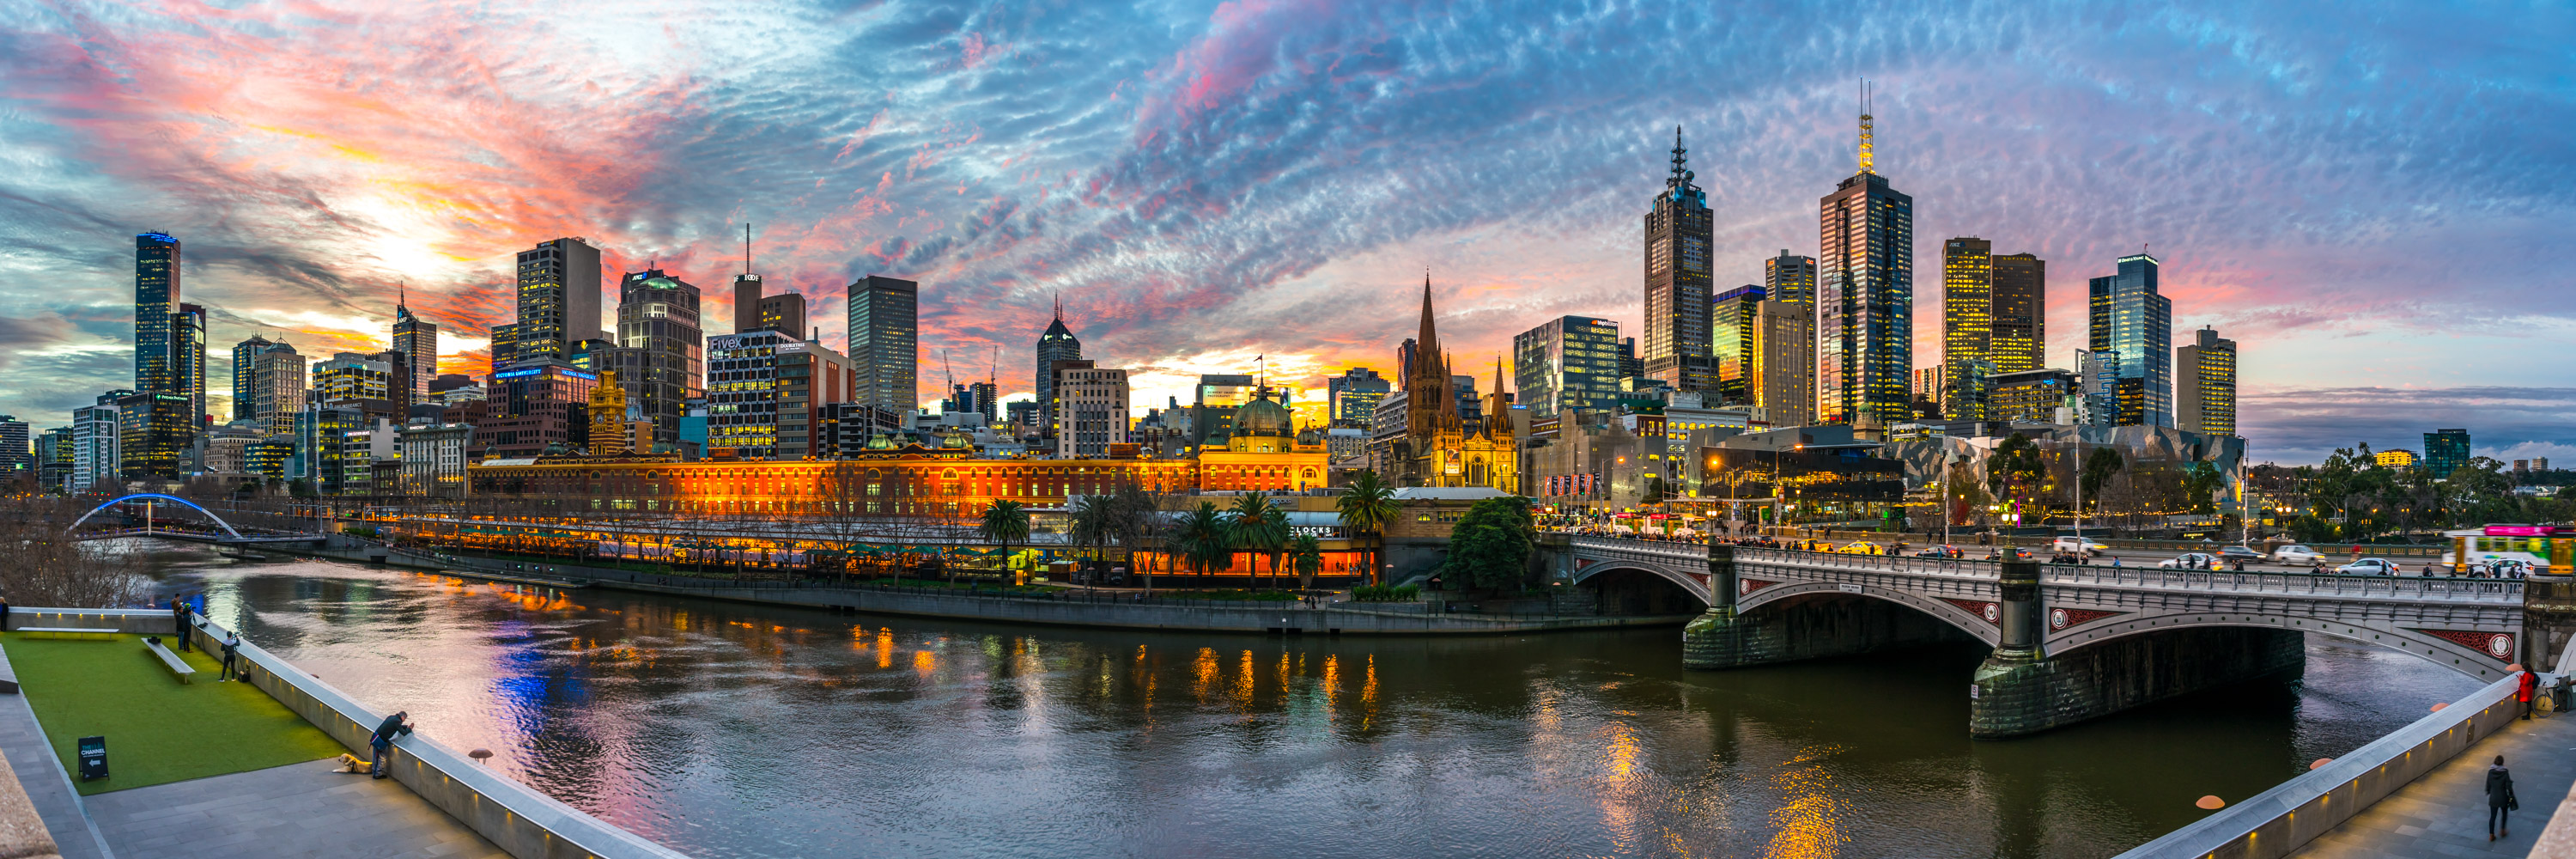 Panoramic Melbourne at its Best | Steven Wright